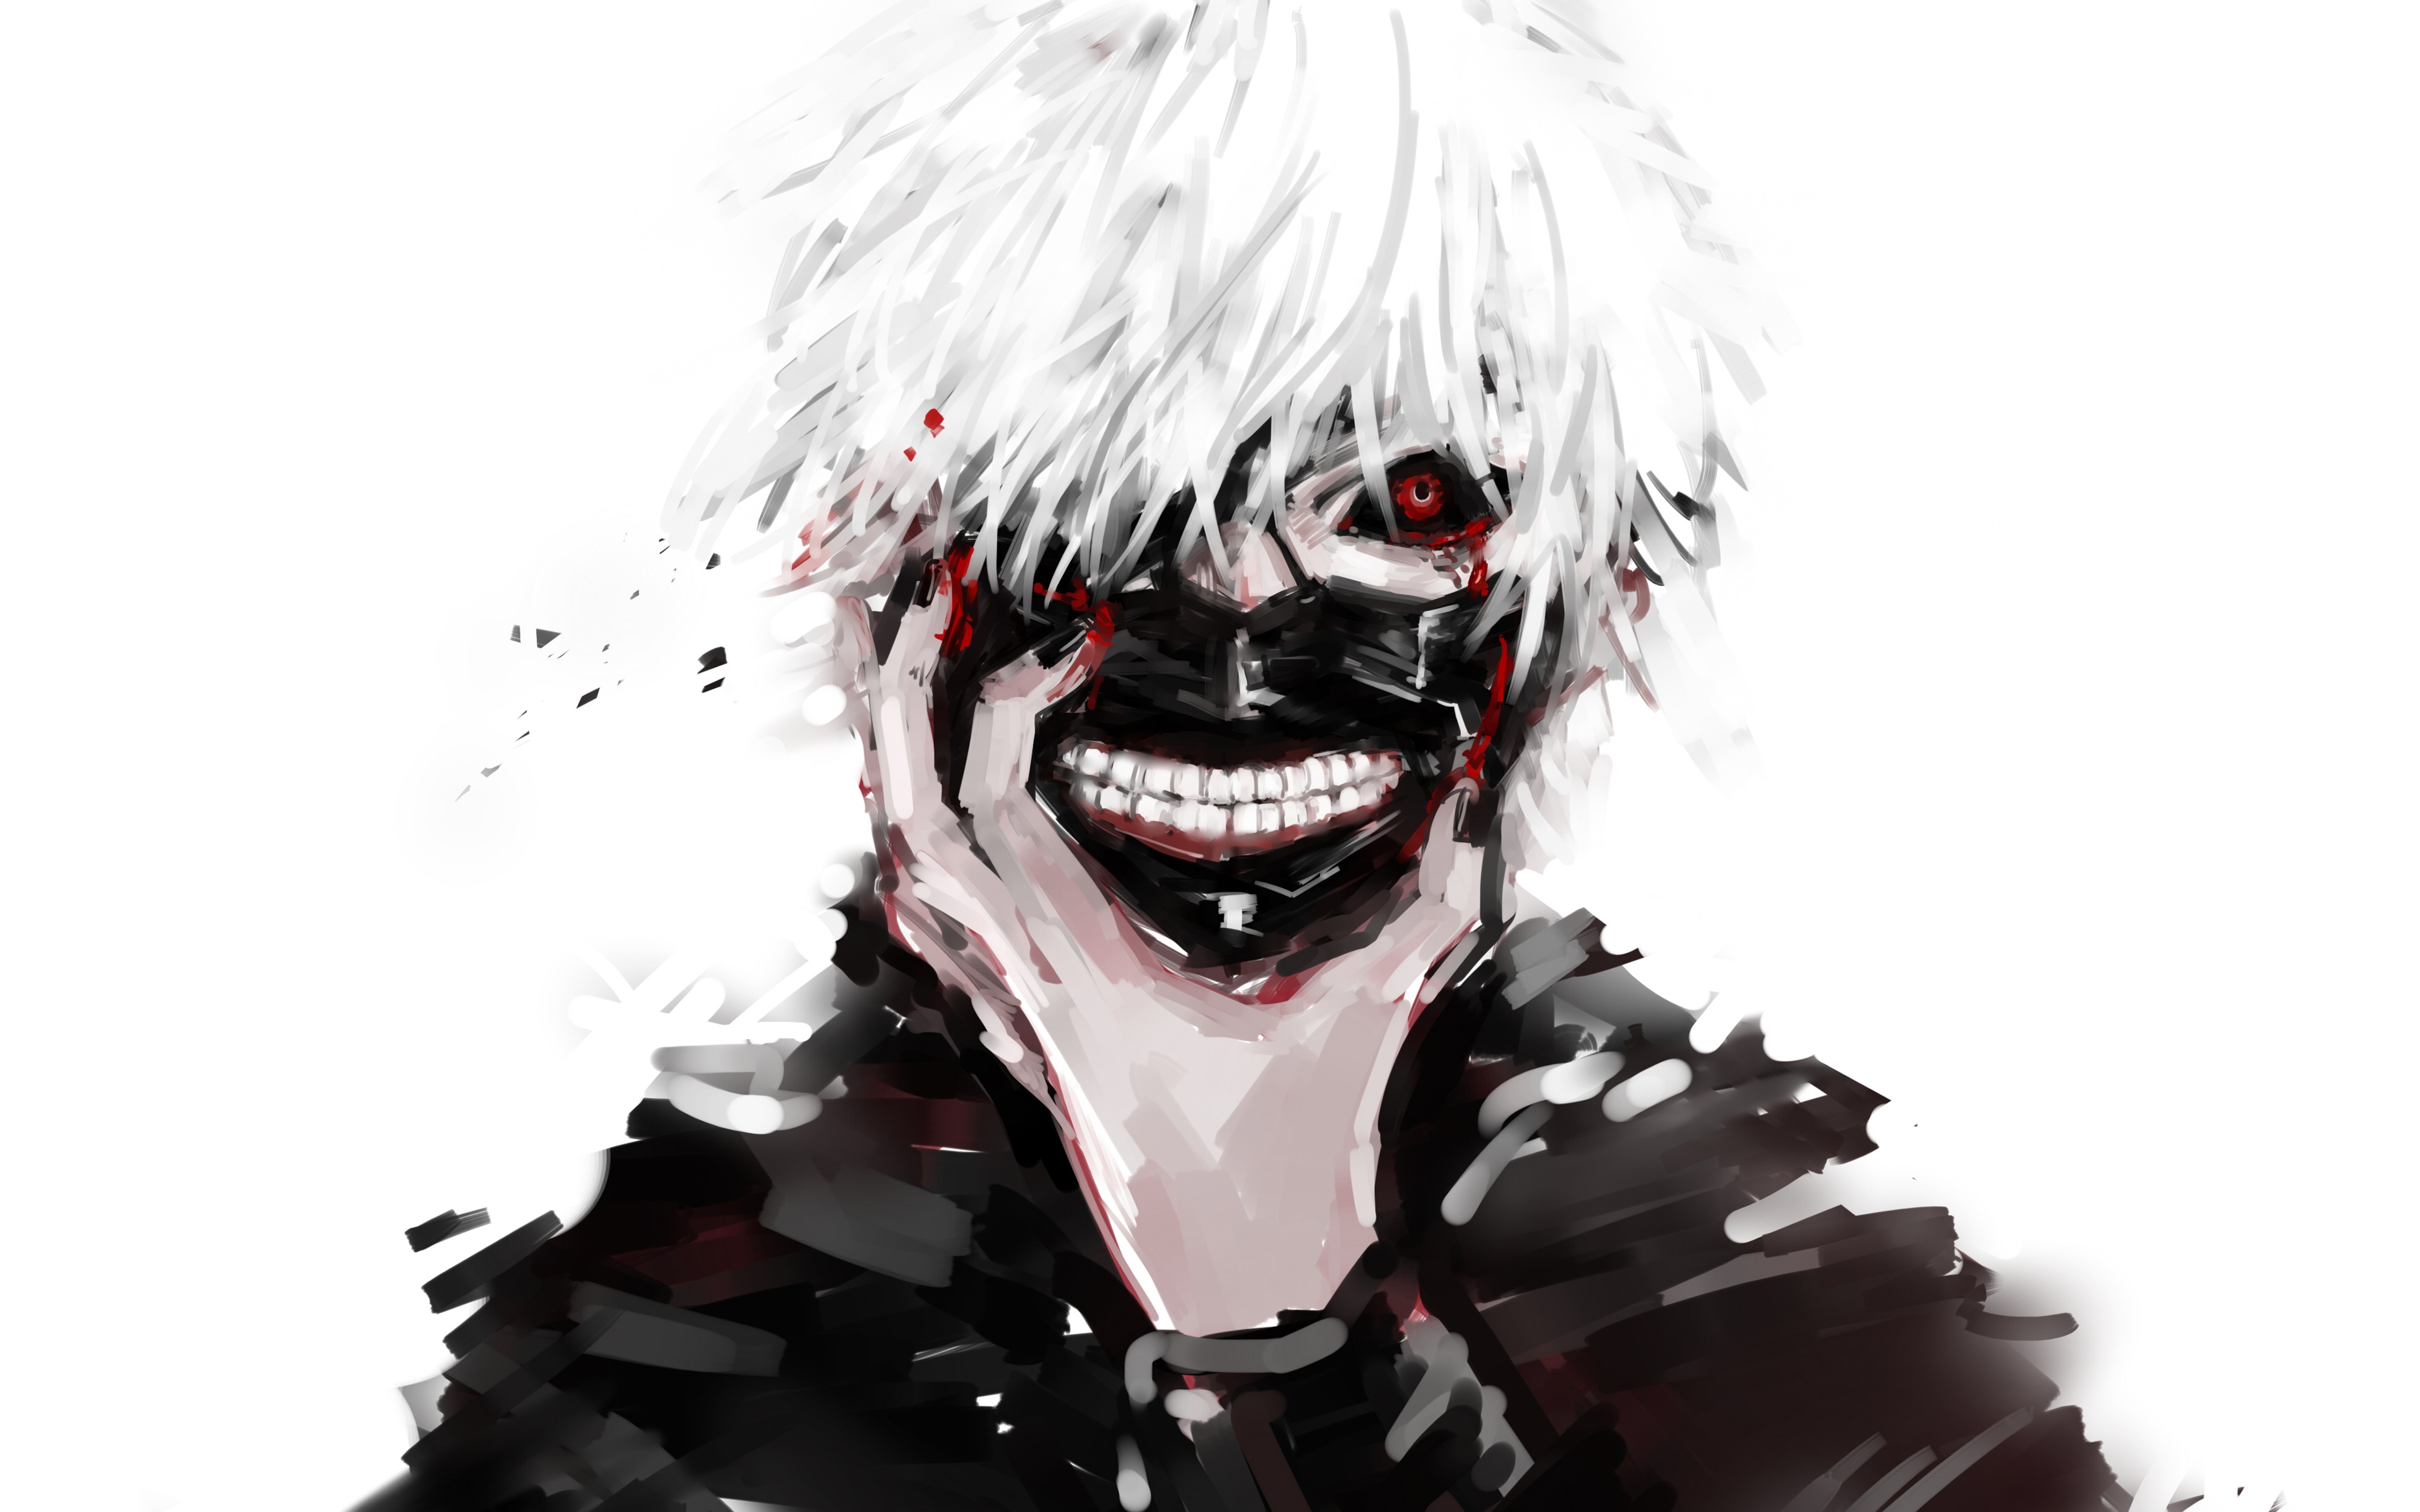 Tokyo Ghoul 4k Ultra HD Wallpaper  Background Image  3840x2400  ID:679362  Wallpaper Abyss